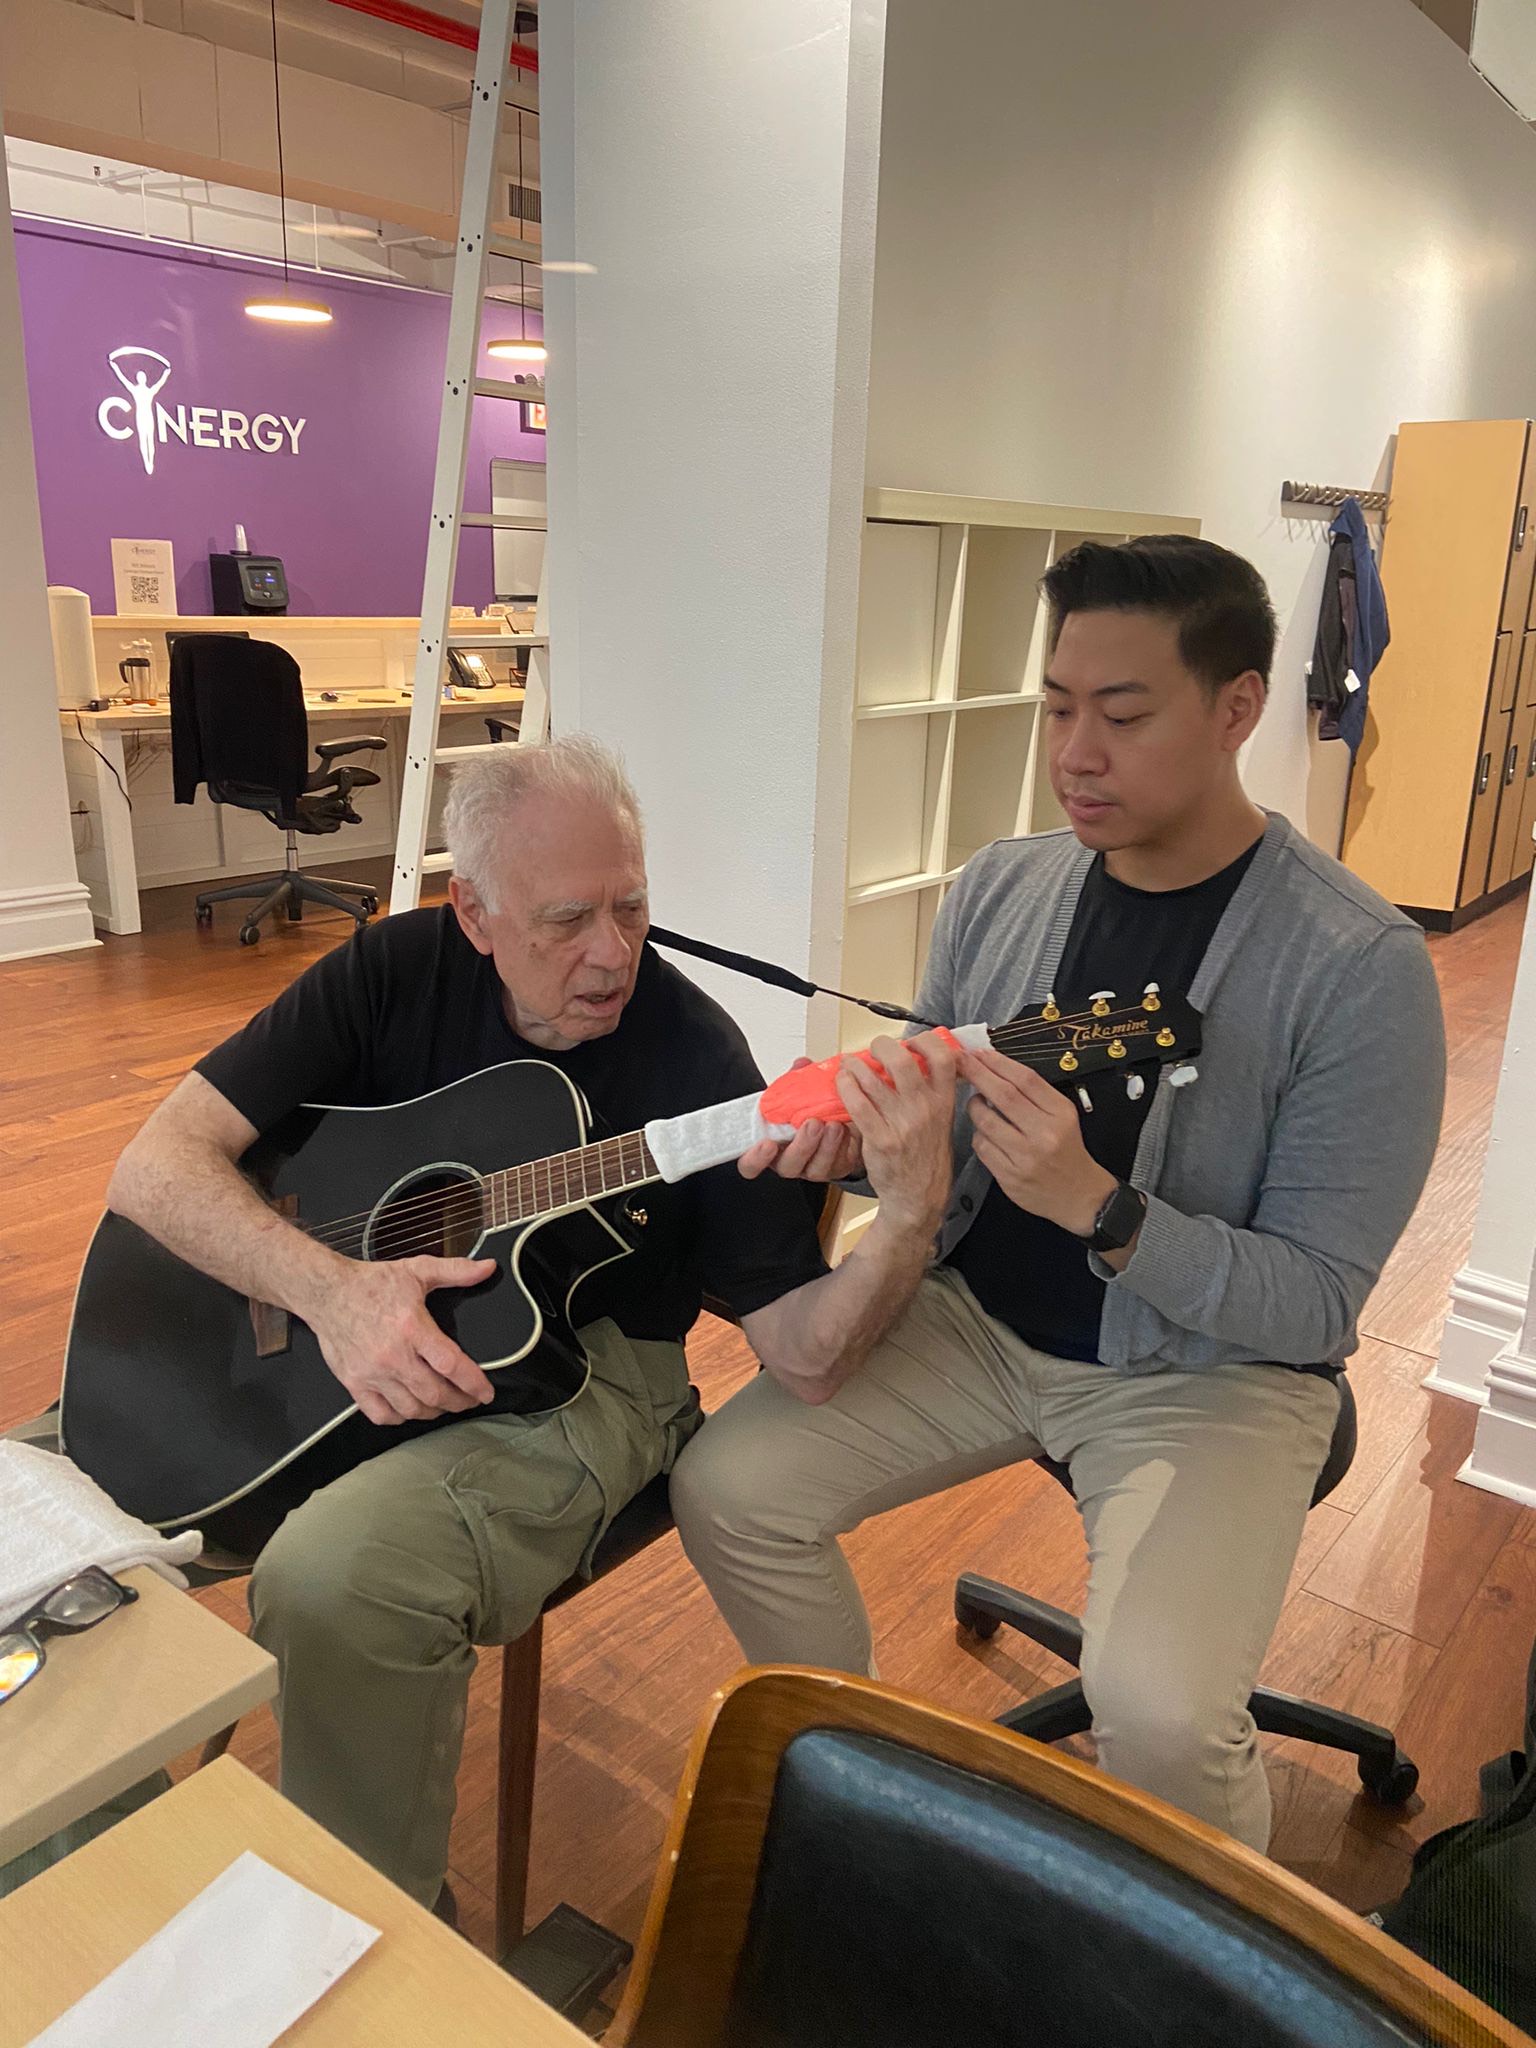 Andy and his patient working on his use of the guitar